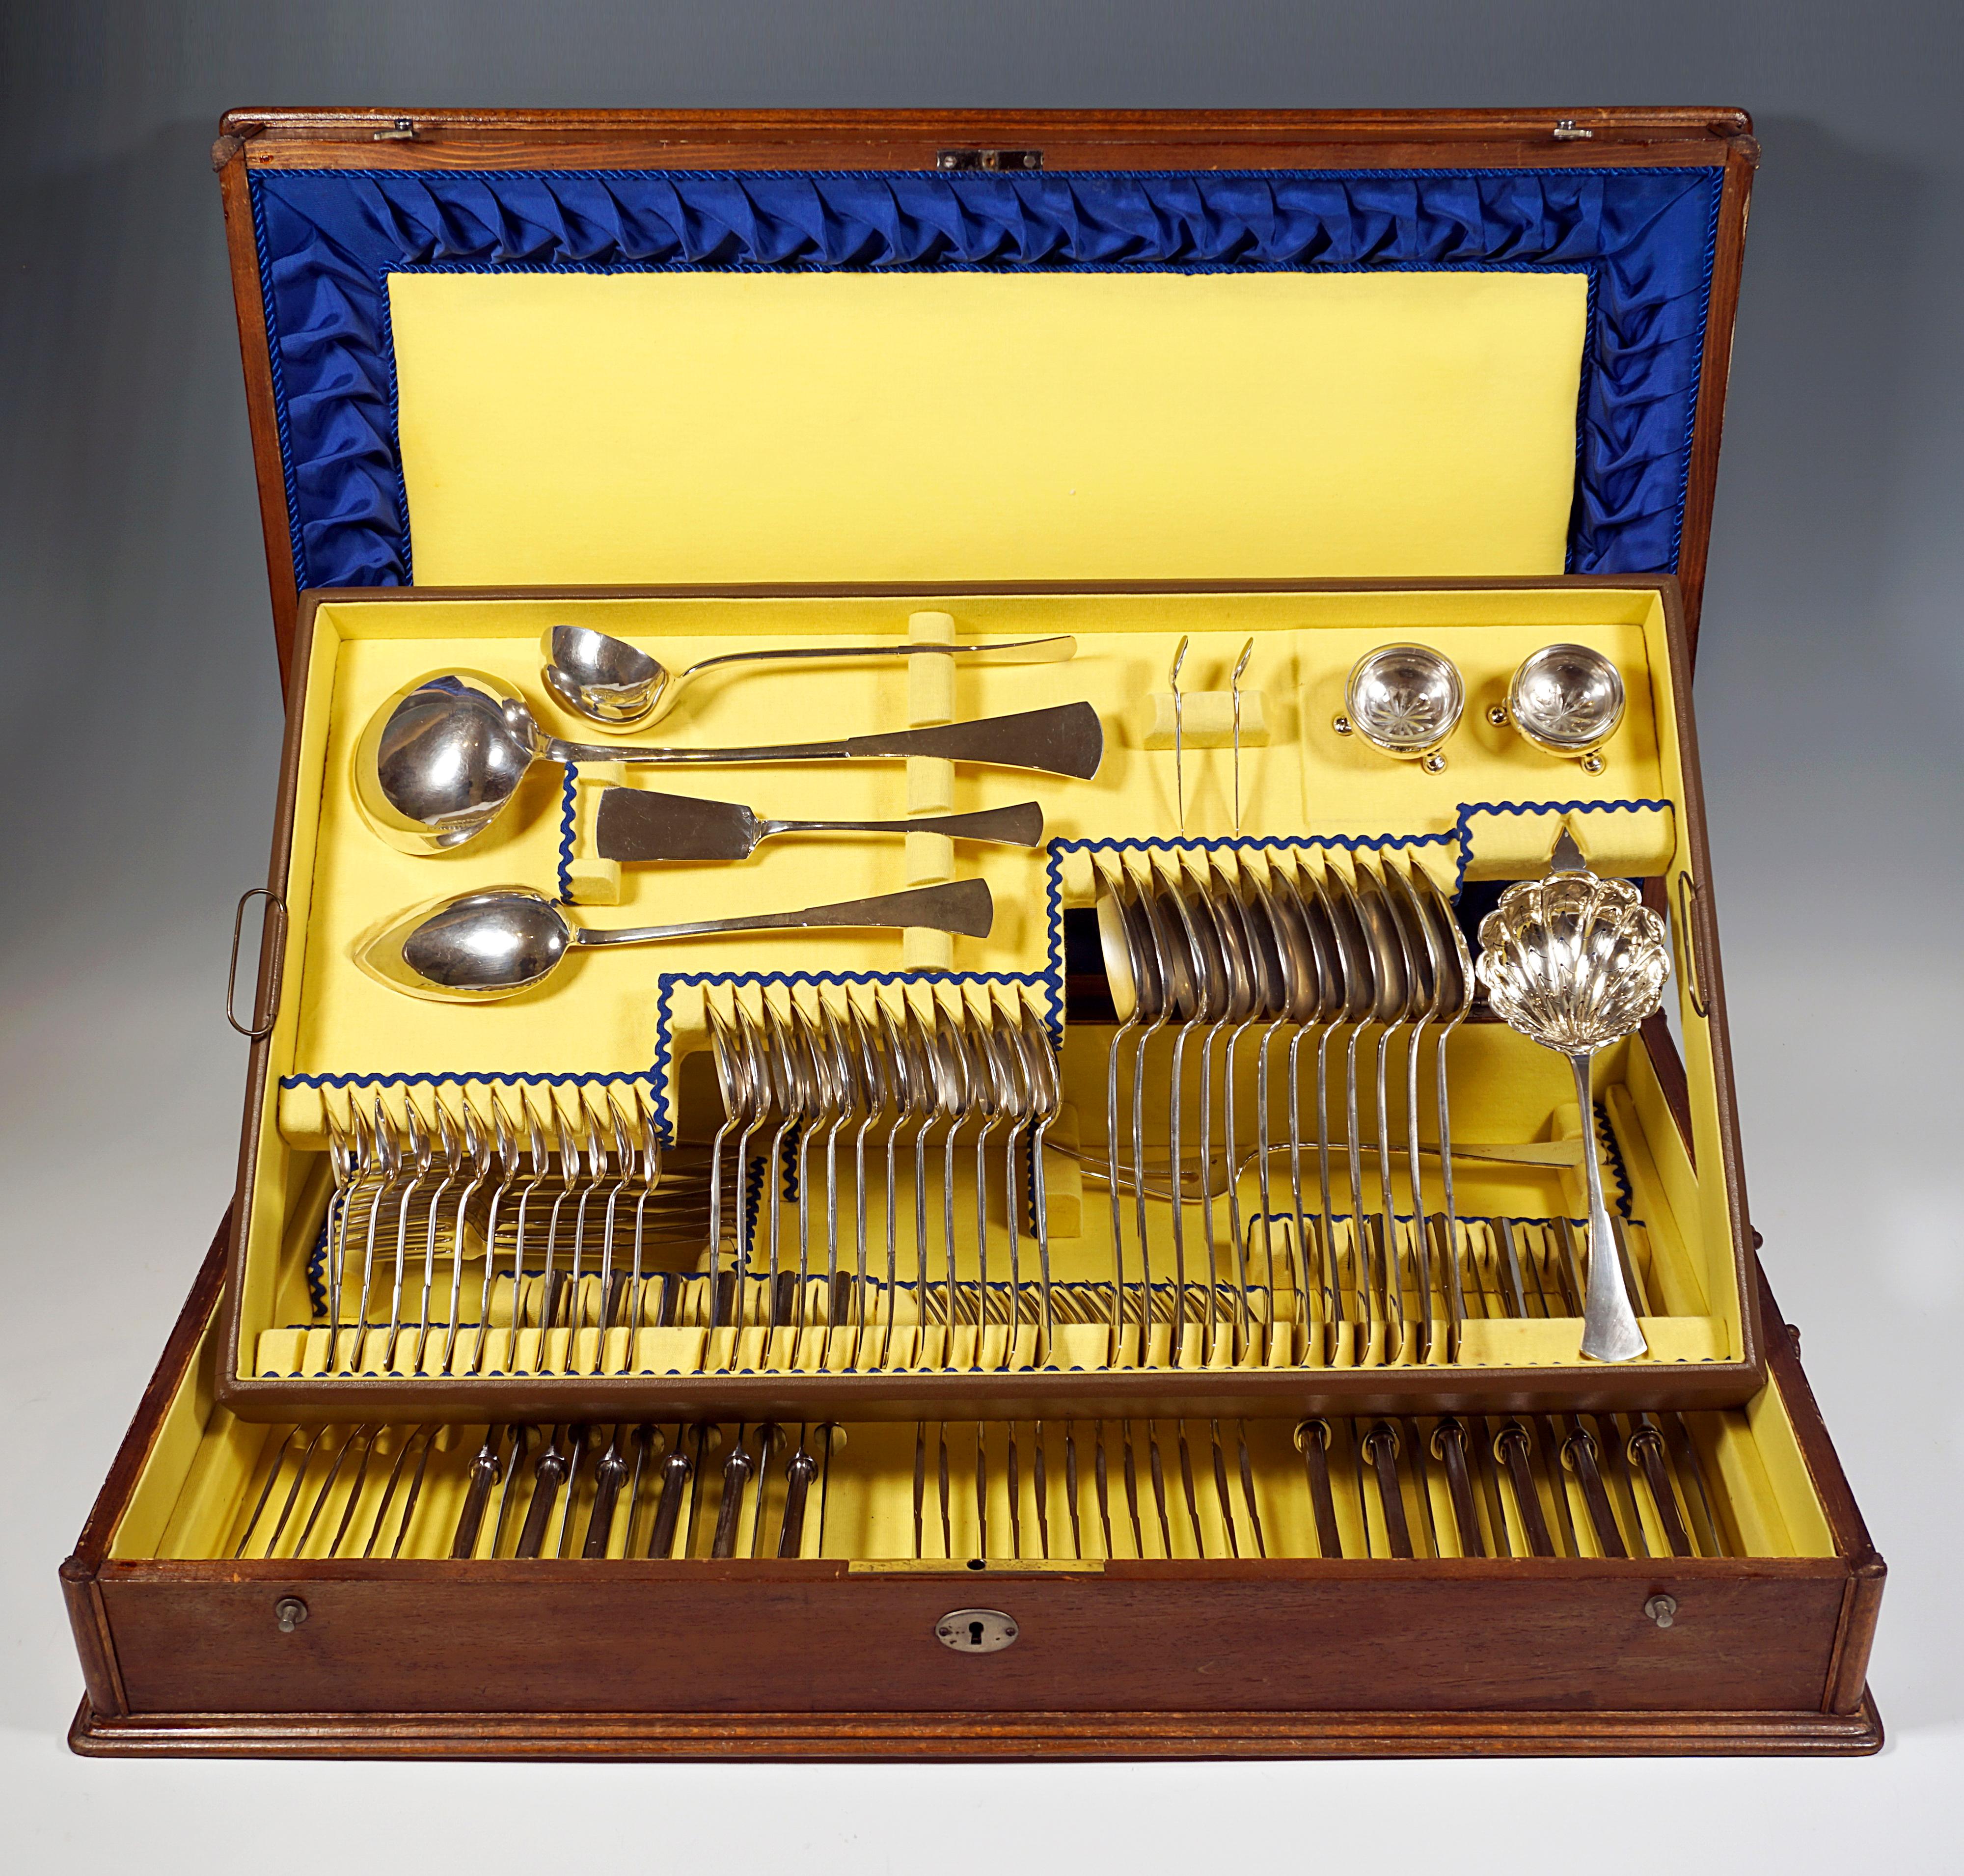 Elegant cutlery set made of solid silver for twelve people consisting of 95 parts in original wooden box.
 
Dateing: circa 1900

Material: Massive silver '800'

Form type: Elegant, simple design with slender bars that fan out at the end of the